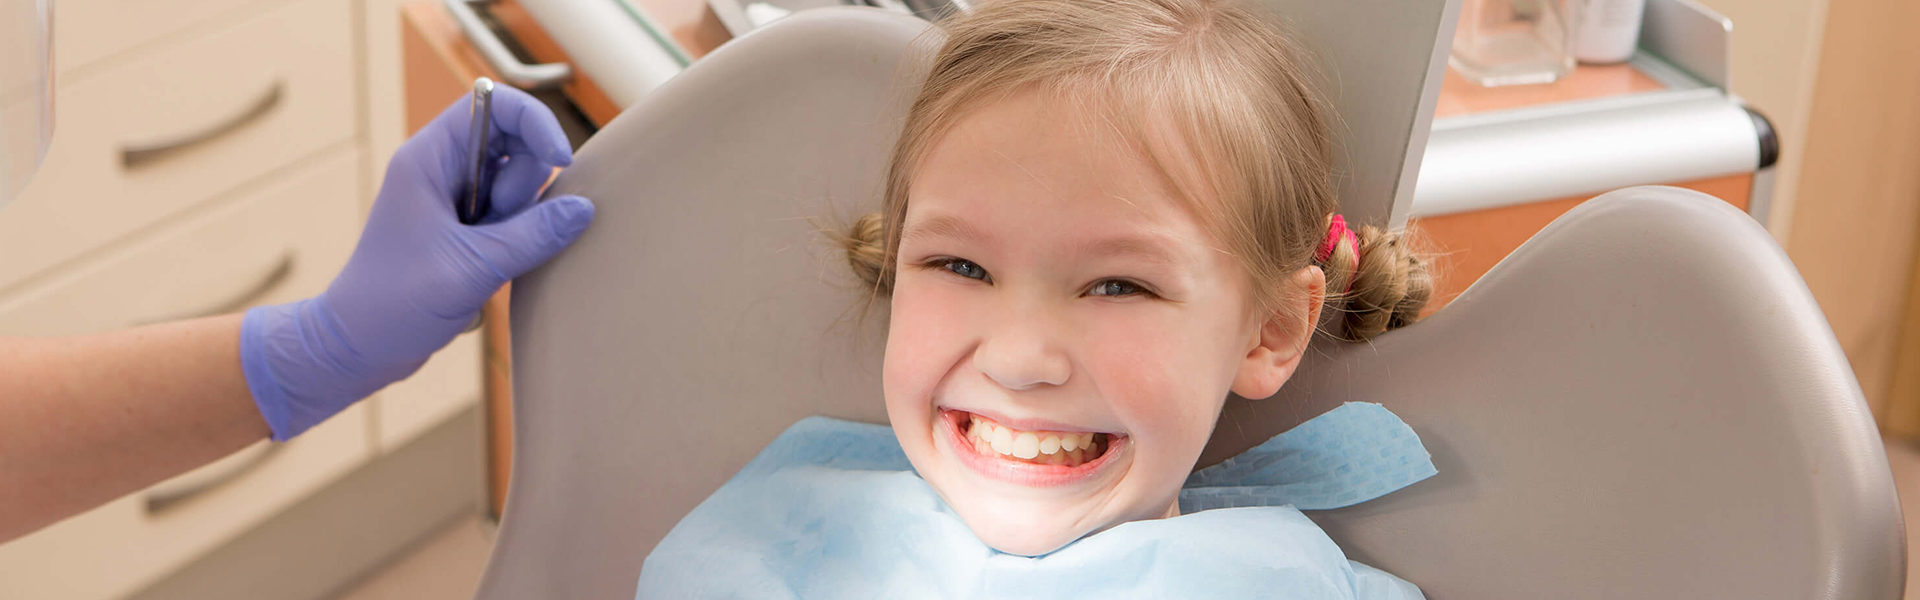 Dental Sealants can help Prevent Tooth Decay in Children